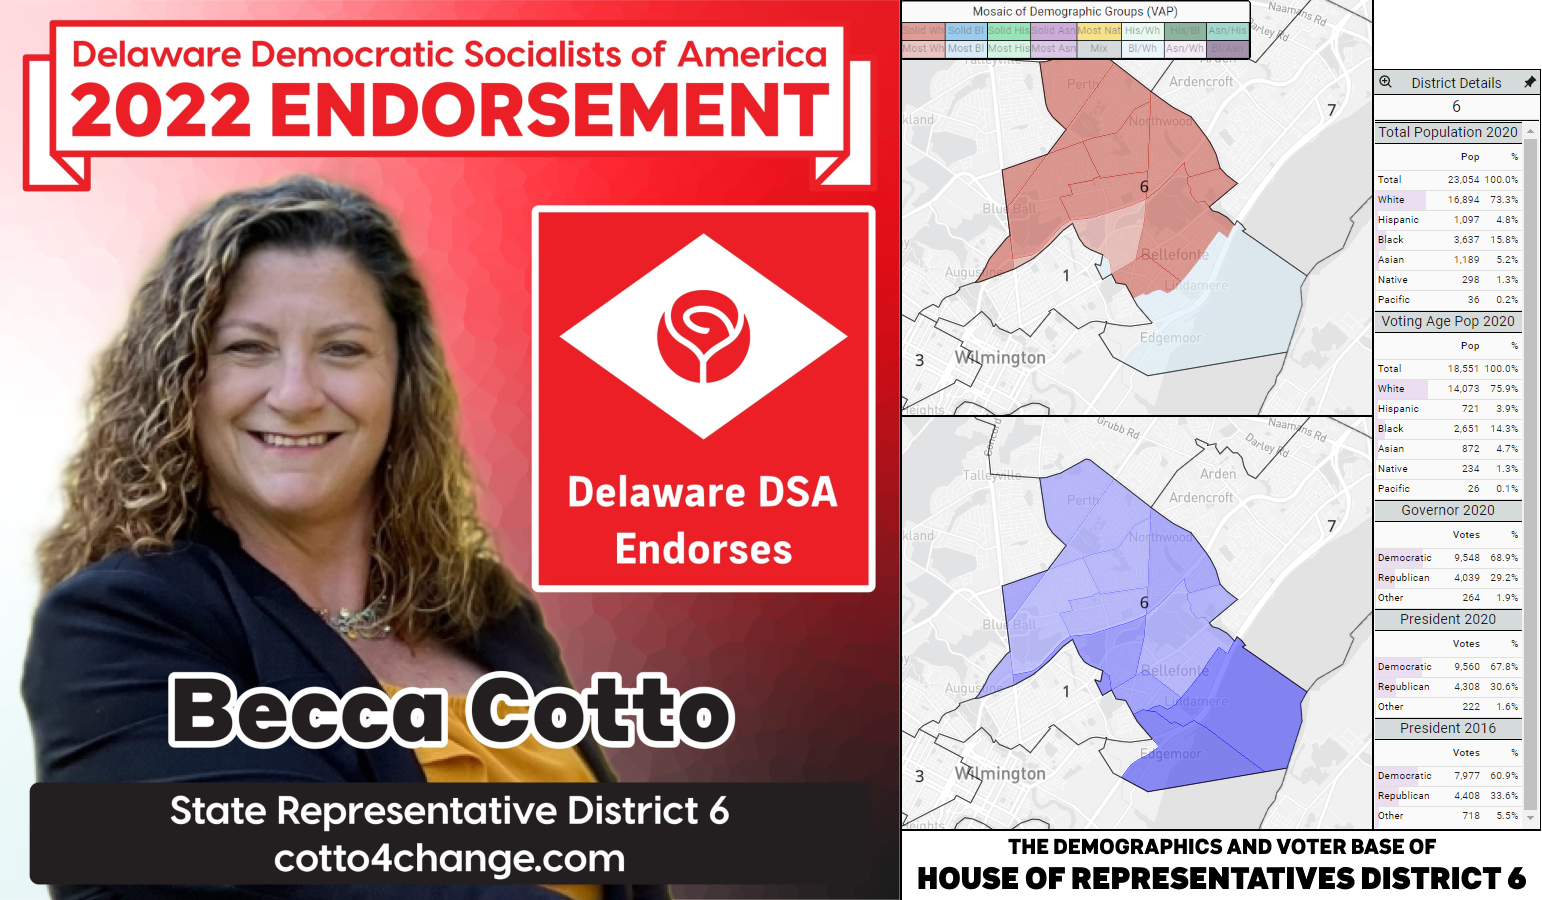 Becca Cotto's endorsement graphic (she/her; left) and a graphic of the demographics and voting base of House District 6 (right).